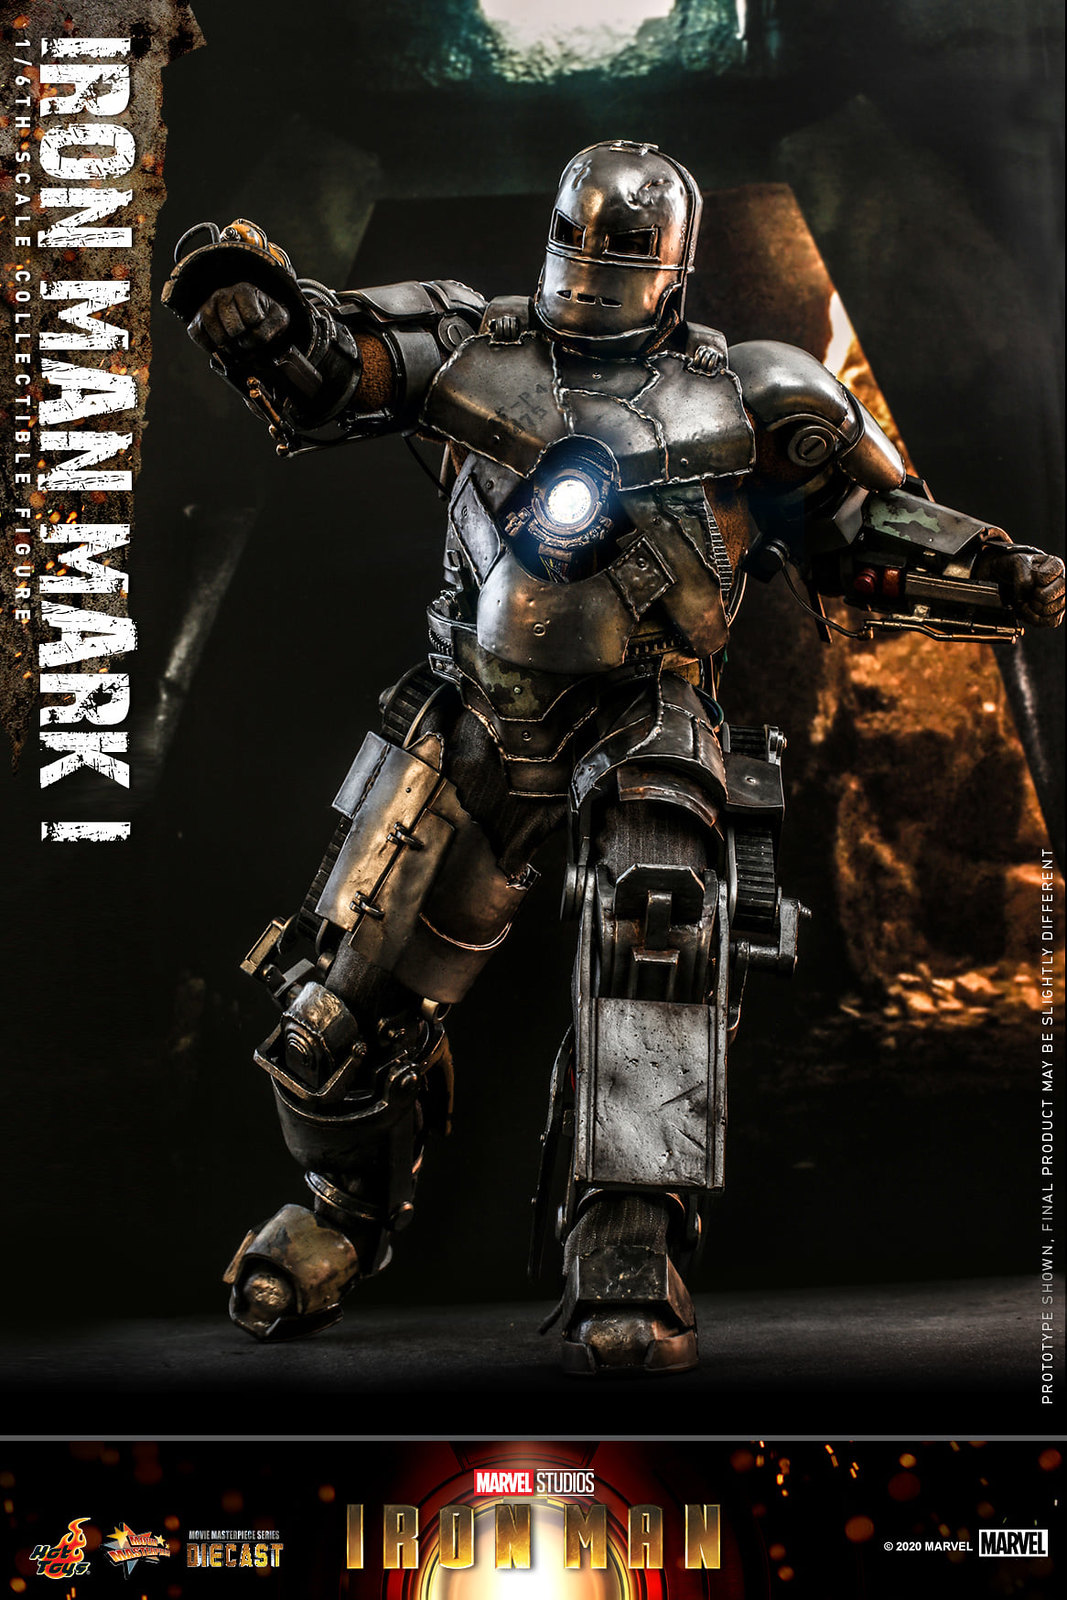 NEW PRODUCT: Hot Toys Iron Man - 1/6th scale Iron Man Mark I Collectible Figure 51312257180_20274c64d2_h